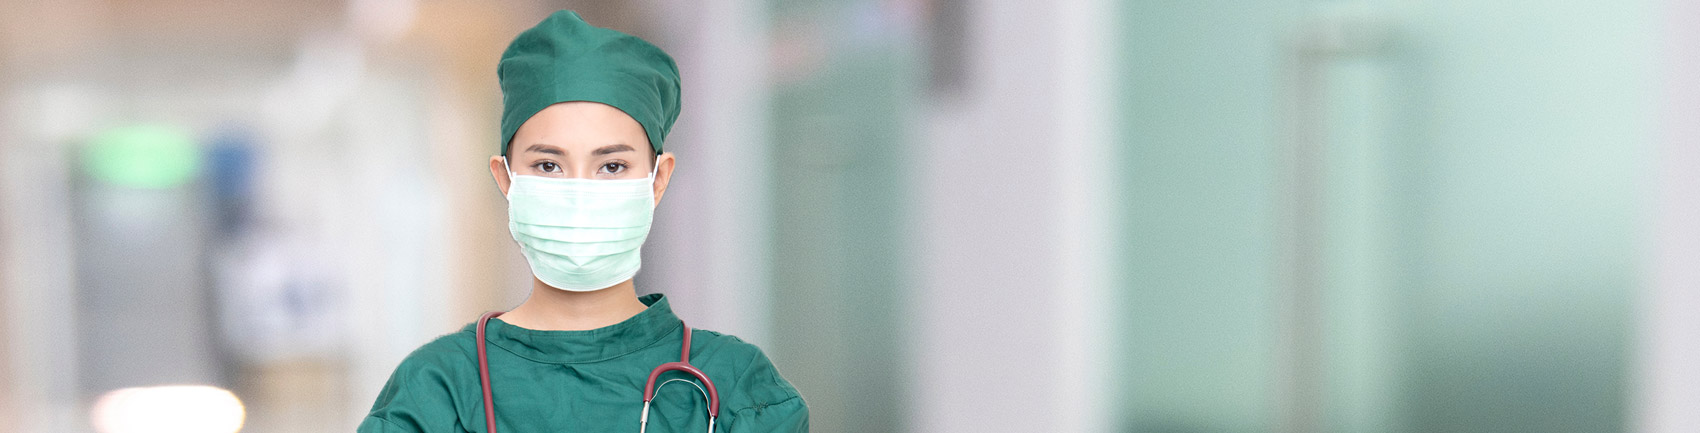 Medical worker wearing green scrubs and cap also wearing a face mask. With promotion message:  Thank you for all you do. Medical Professionals. First Responders.